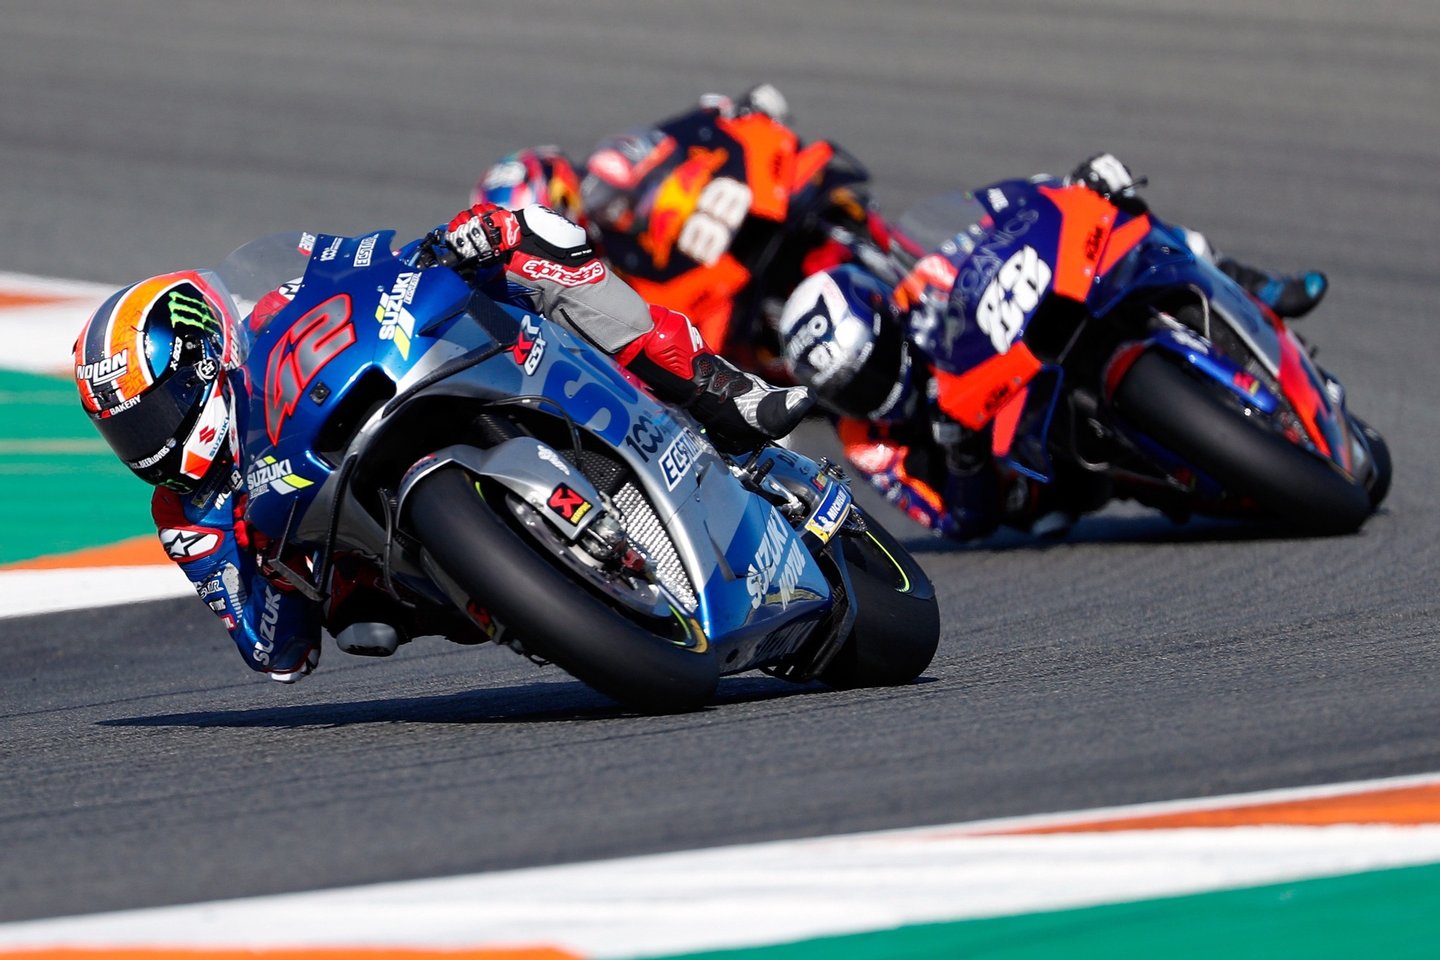 epa08821922 Spanish MotoGP rider Alex Rins (L) takes a bend ahead of Portuguese Miguel Oliveira (R) and South African Brad Binder (C, rear) during the Motul Comunitat Valenciana GP race at Circuit Ricardo Tormo track, in Cheste, Valencia, eastern Spain, 15 November 2020. EPA/Kai Foersterling